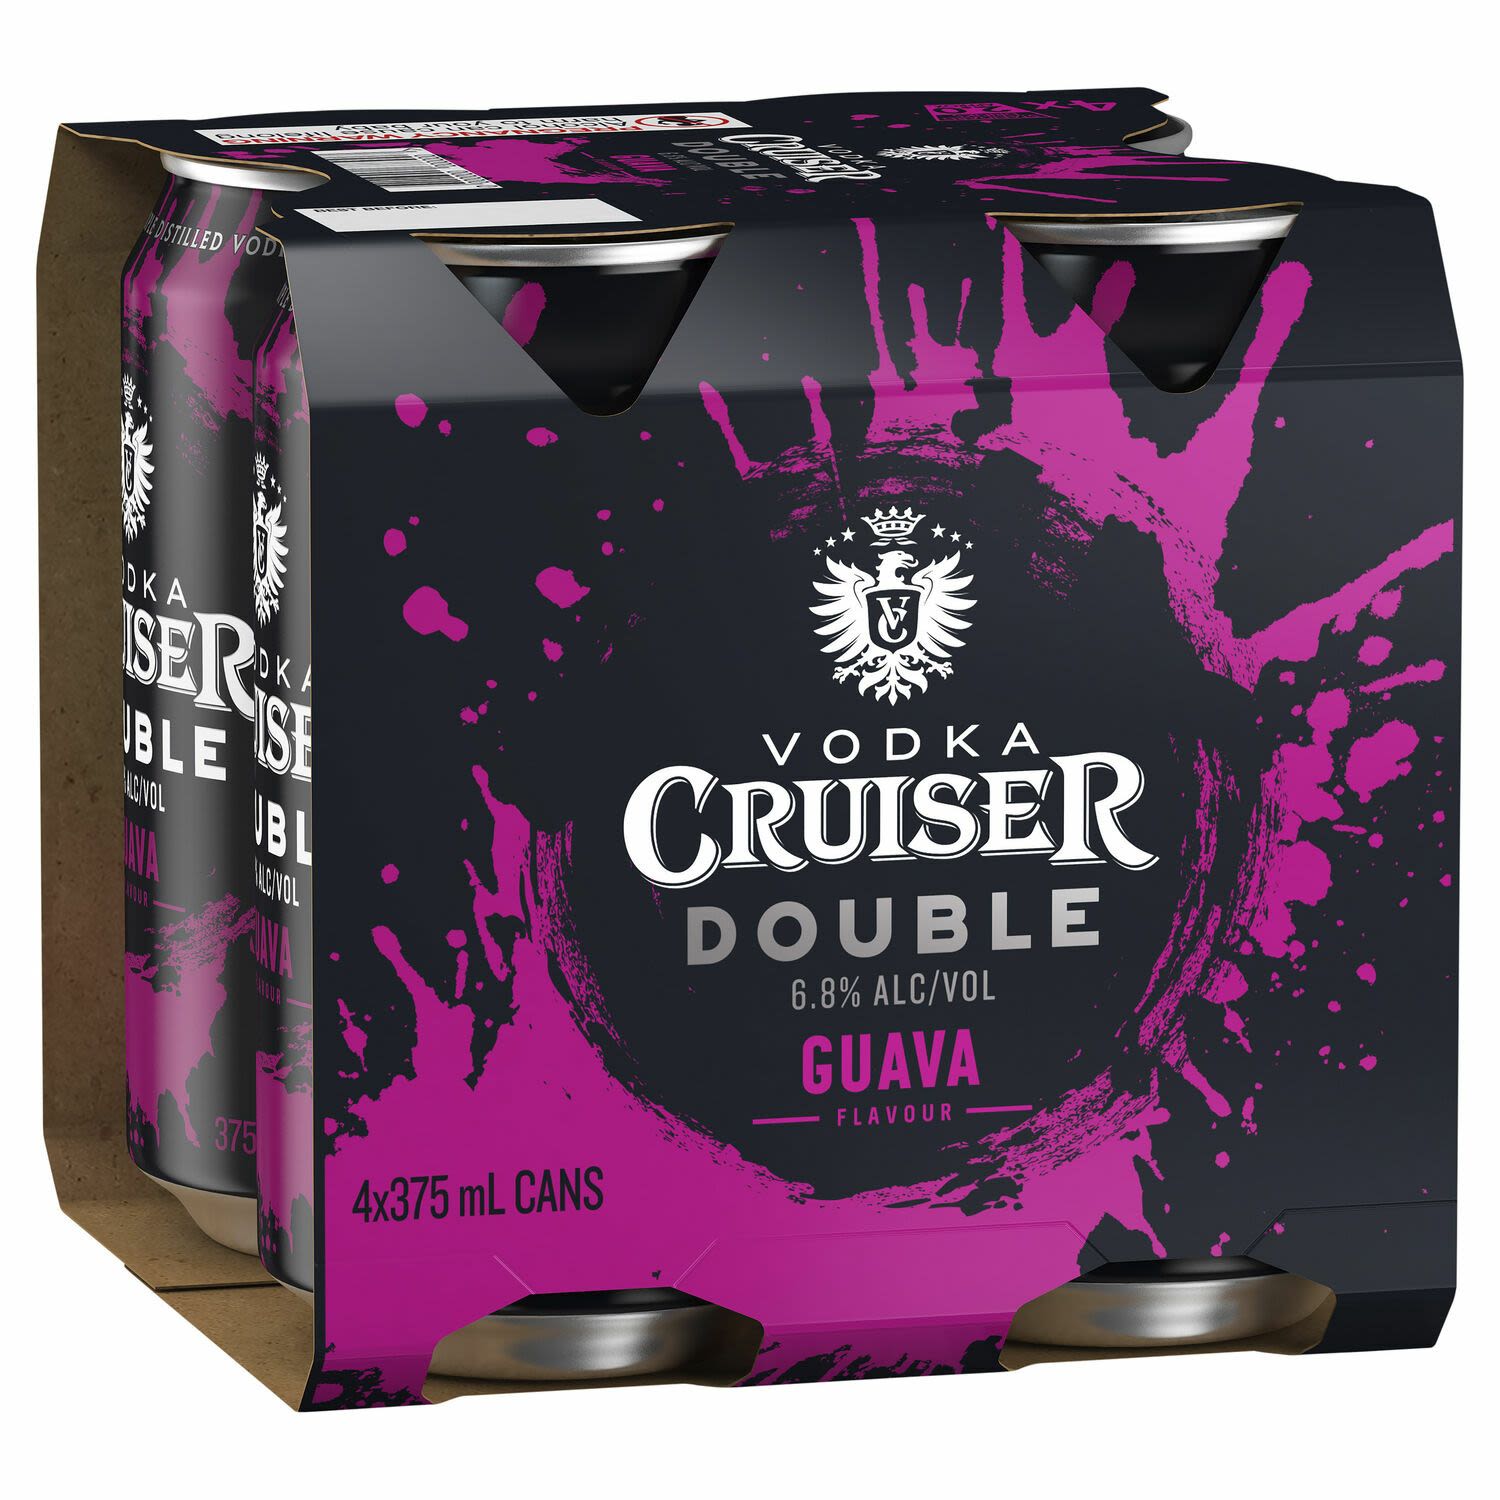 Vodka Cruiser Double Black Guava 6.8% Can 375mL 4 Pack